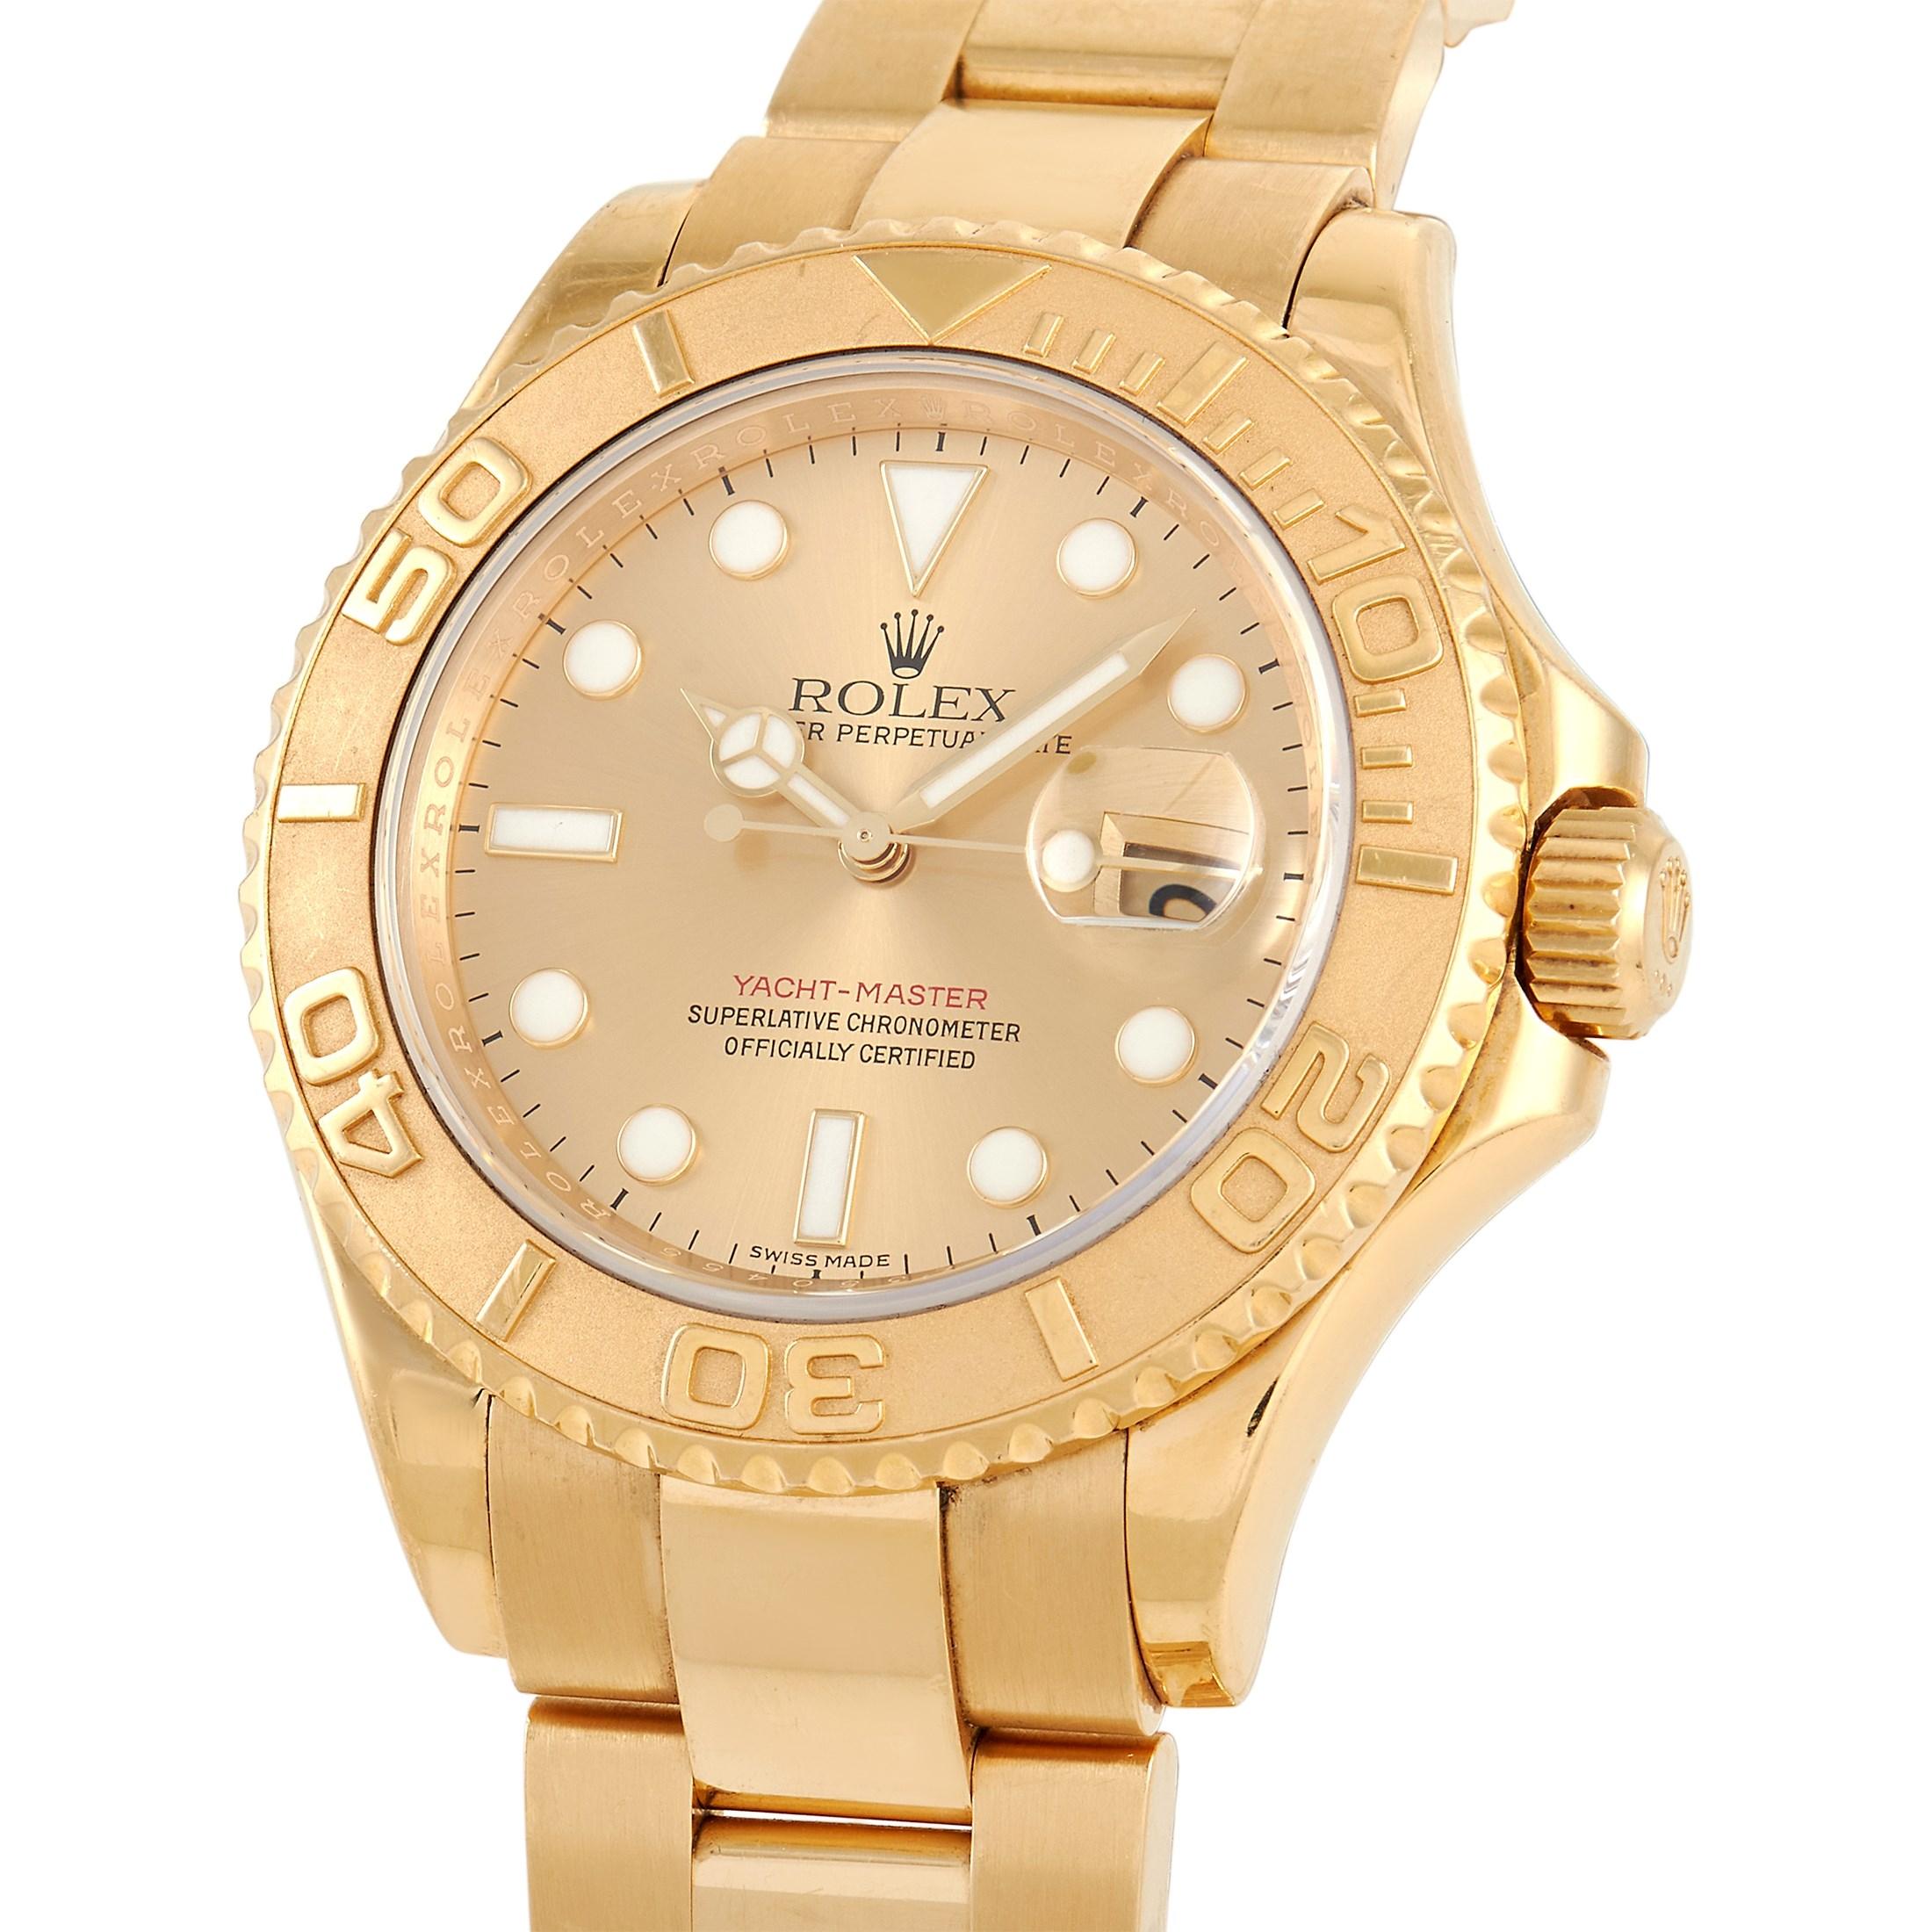 Although this sporty yet luxurious Rolex Yacht Master 18K Yellow Gold Champagne Watch 16628 will best complement a luxury boat, it also looks perfect at home on land. This full gold timepiece is a 2001 updated version with a champagne dial and white